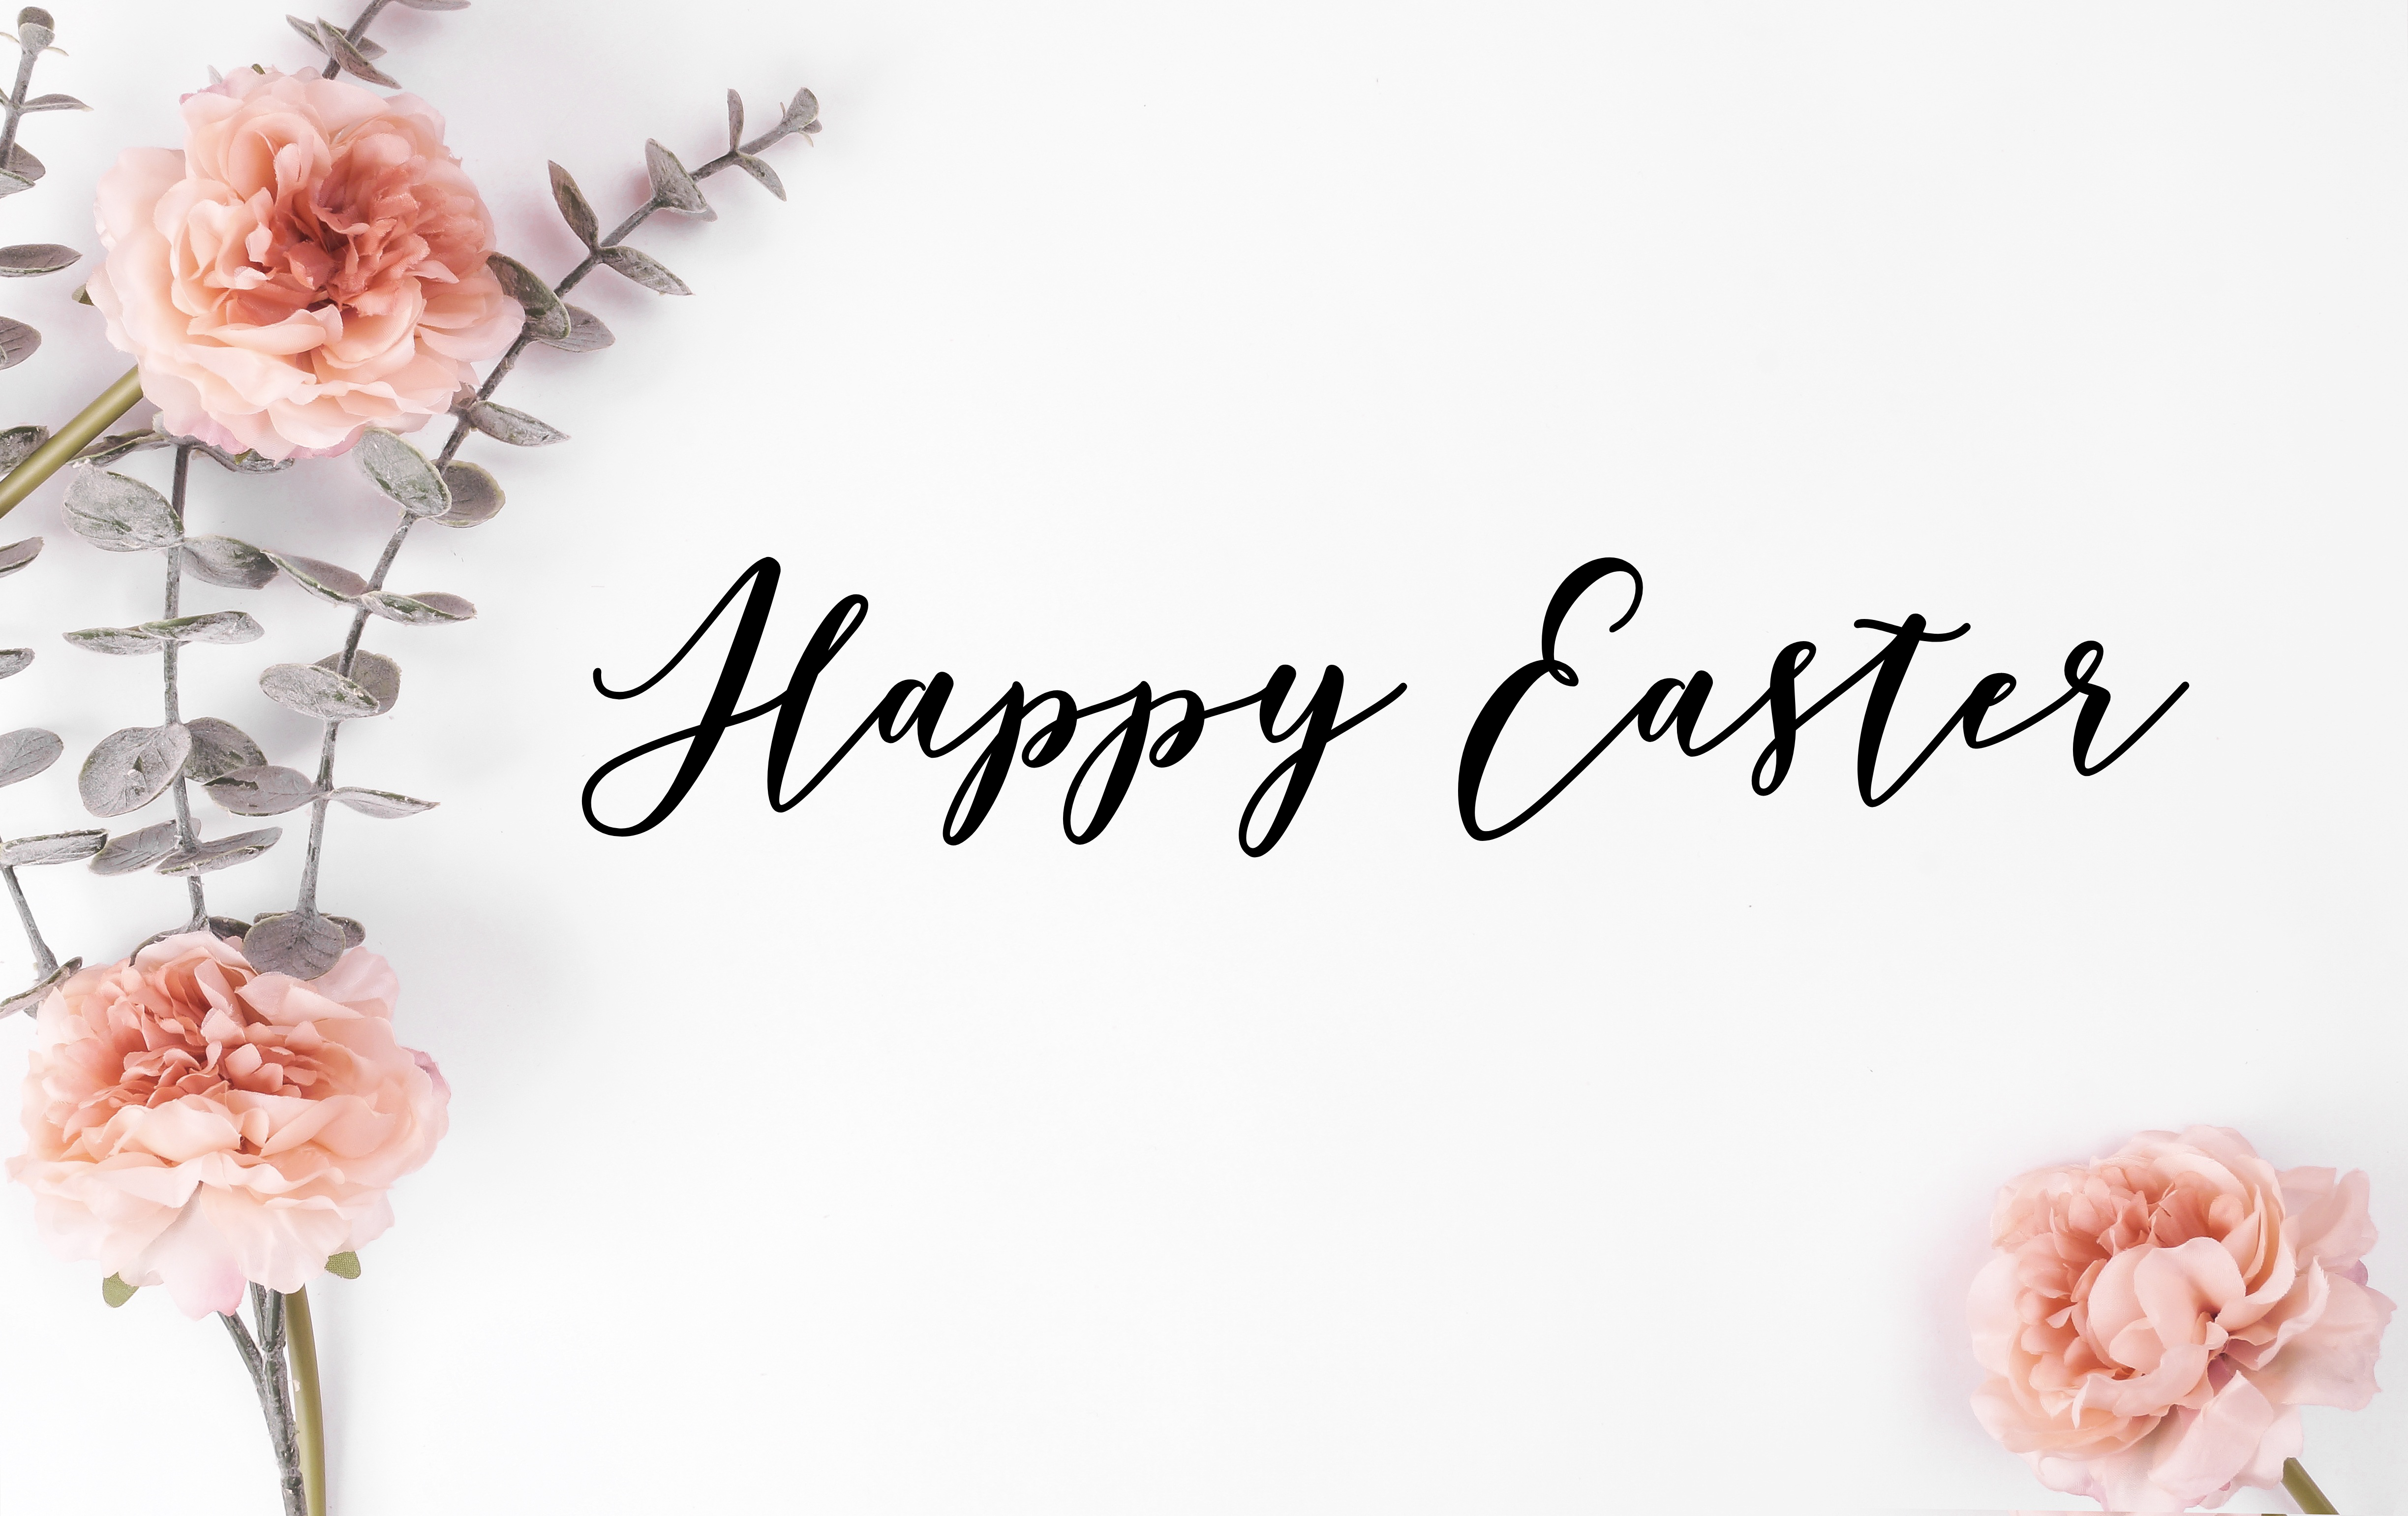 Happy Easter Decal - Holiday Easter/Spring Vinyl Decals for Home, Gifts, Businesses and More!